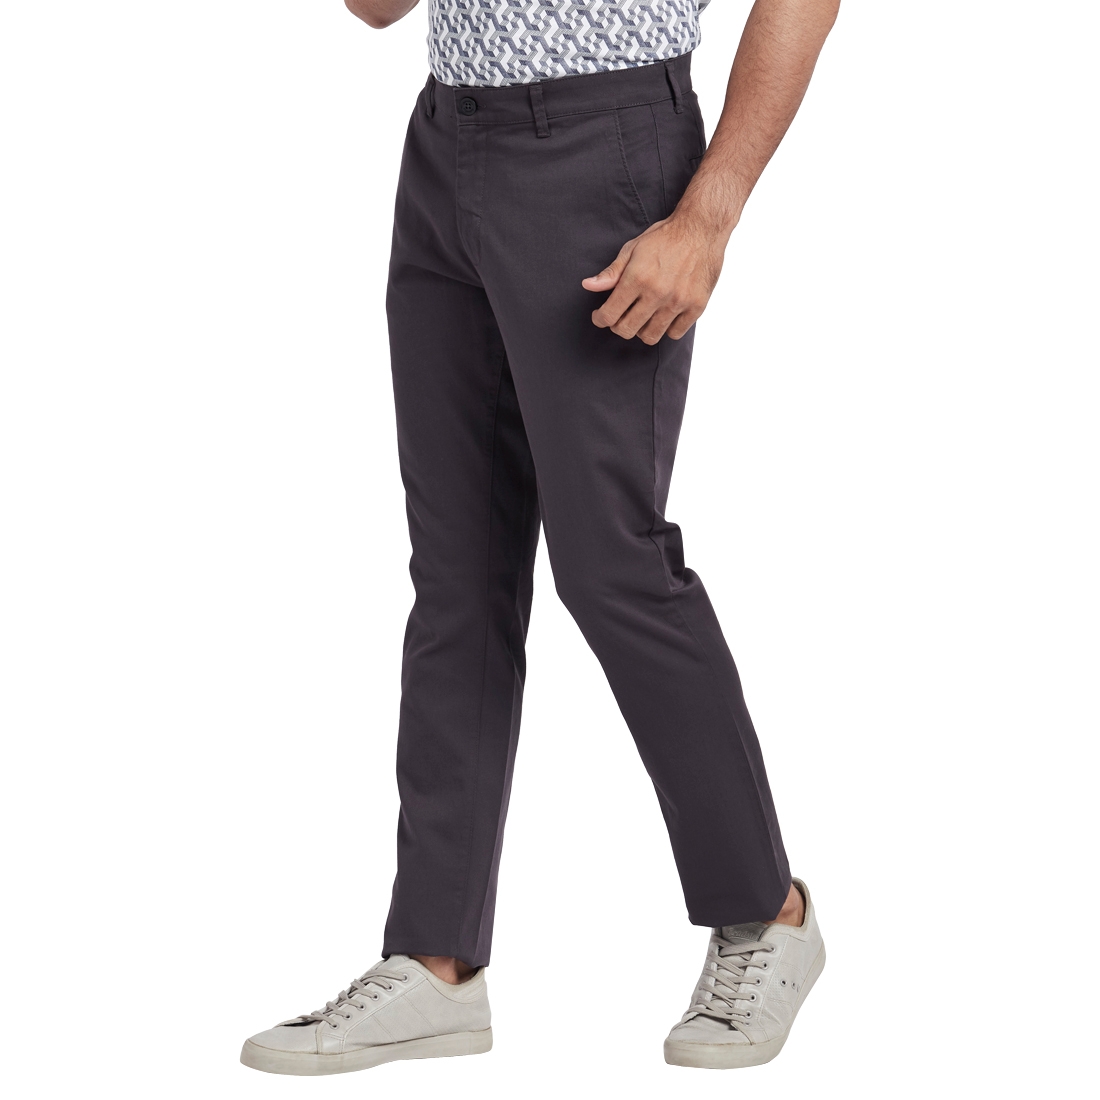 ColorPlus Grey Trousers